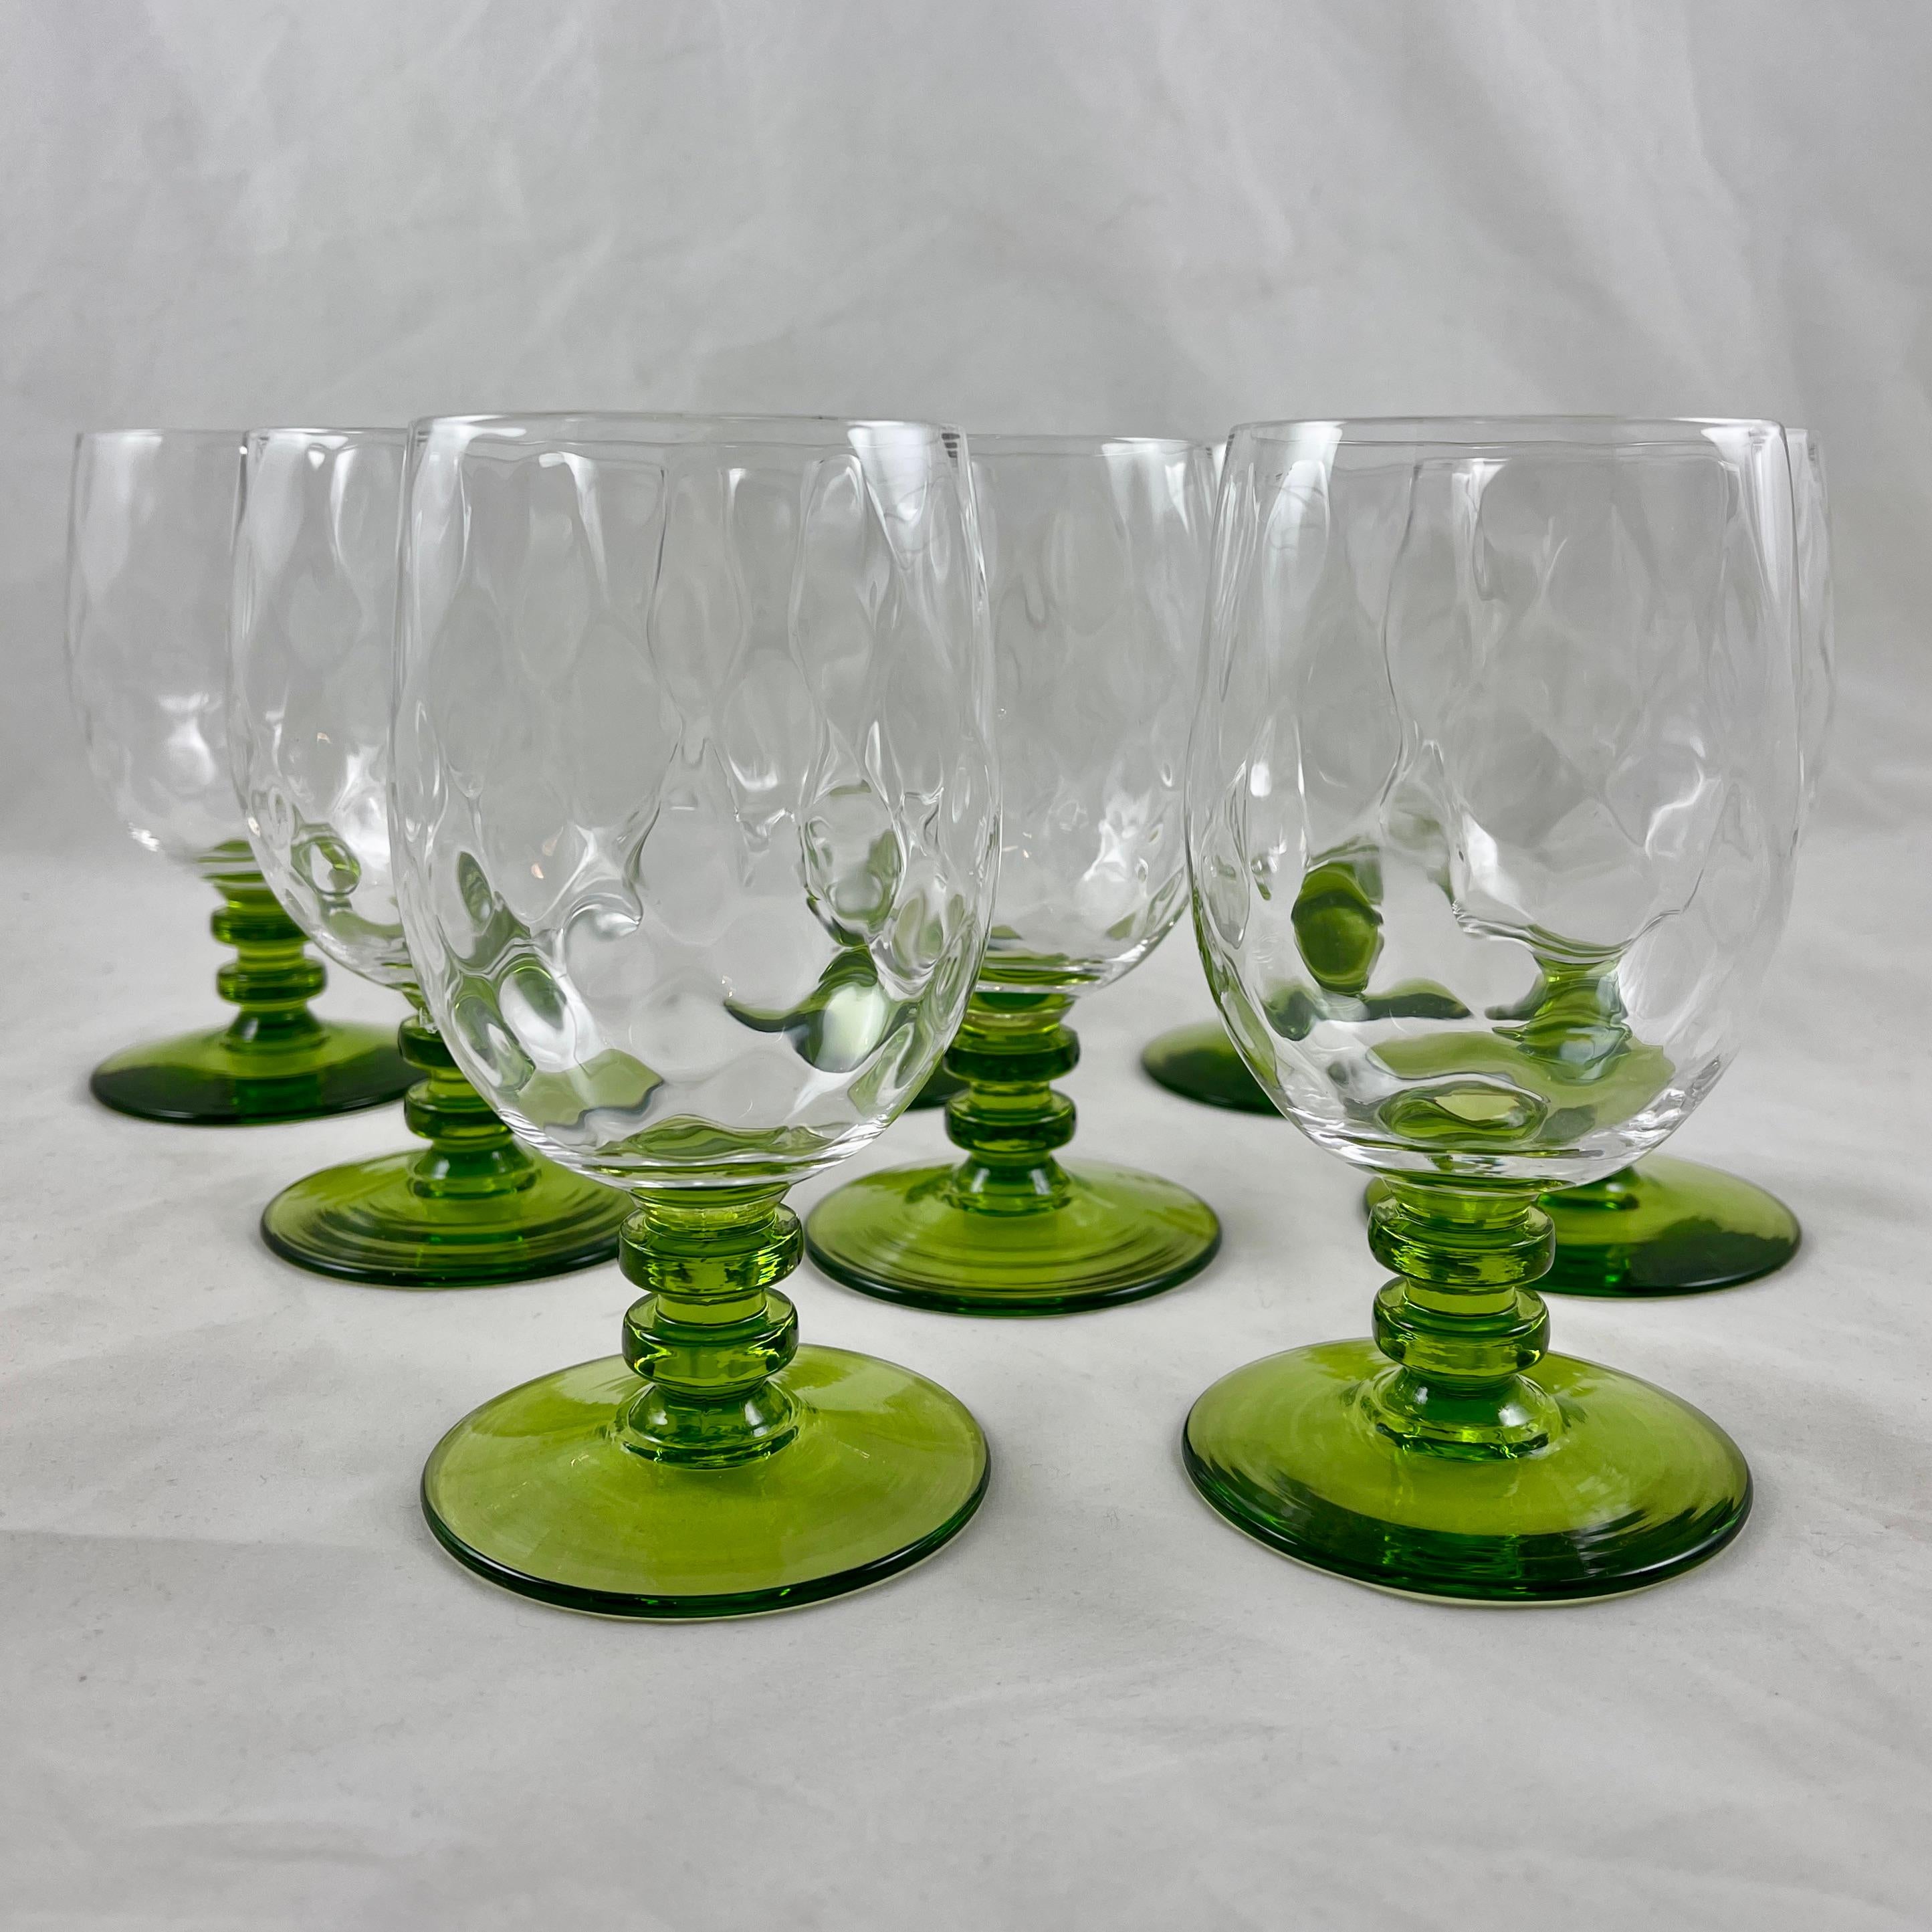 A set of eight, tall, Mid-Century Modern Era goblets in the Bryce 670 Diamond Optic pattern, Bryce Brothers Glassworks, circa 1960s.

The Diamond Optic is a blown-crystal stemware pattern produced until 1965. A multi knobbed, stacked stem in moss